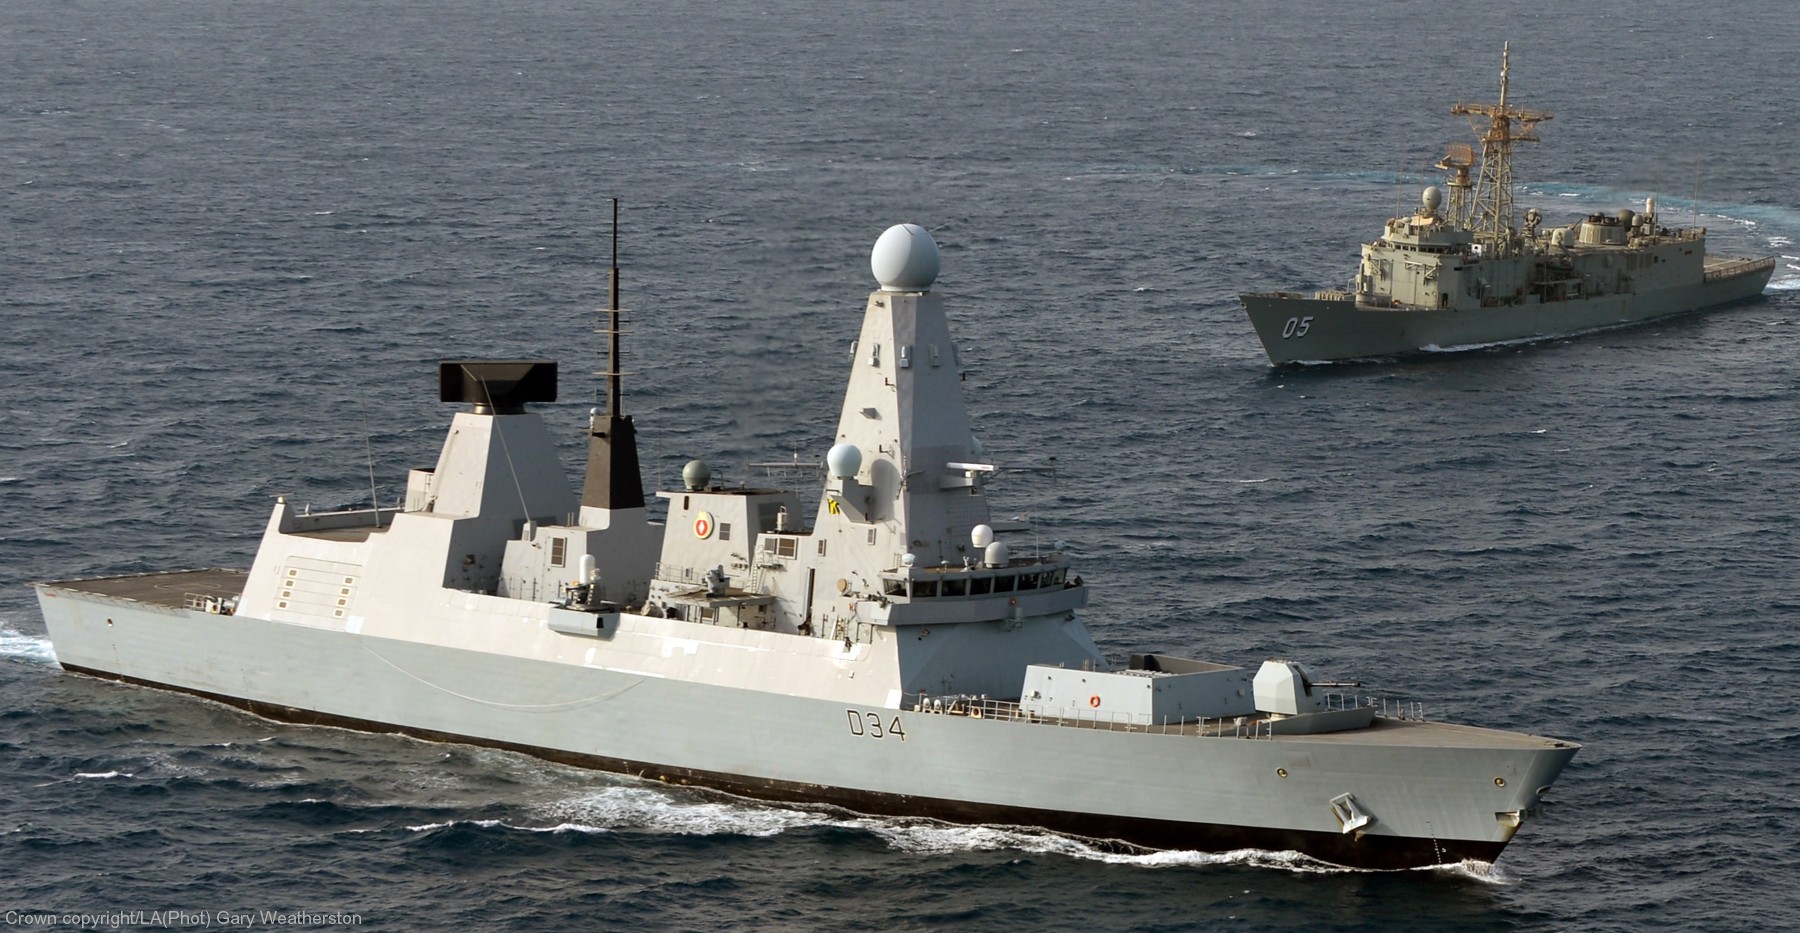 hms diamond d-34 type 45 daring class guided missile destroyer ddg royal navy sea viper paams 14